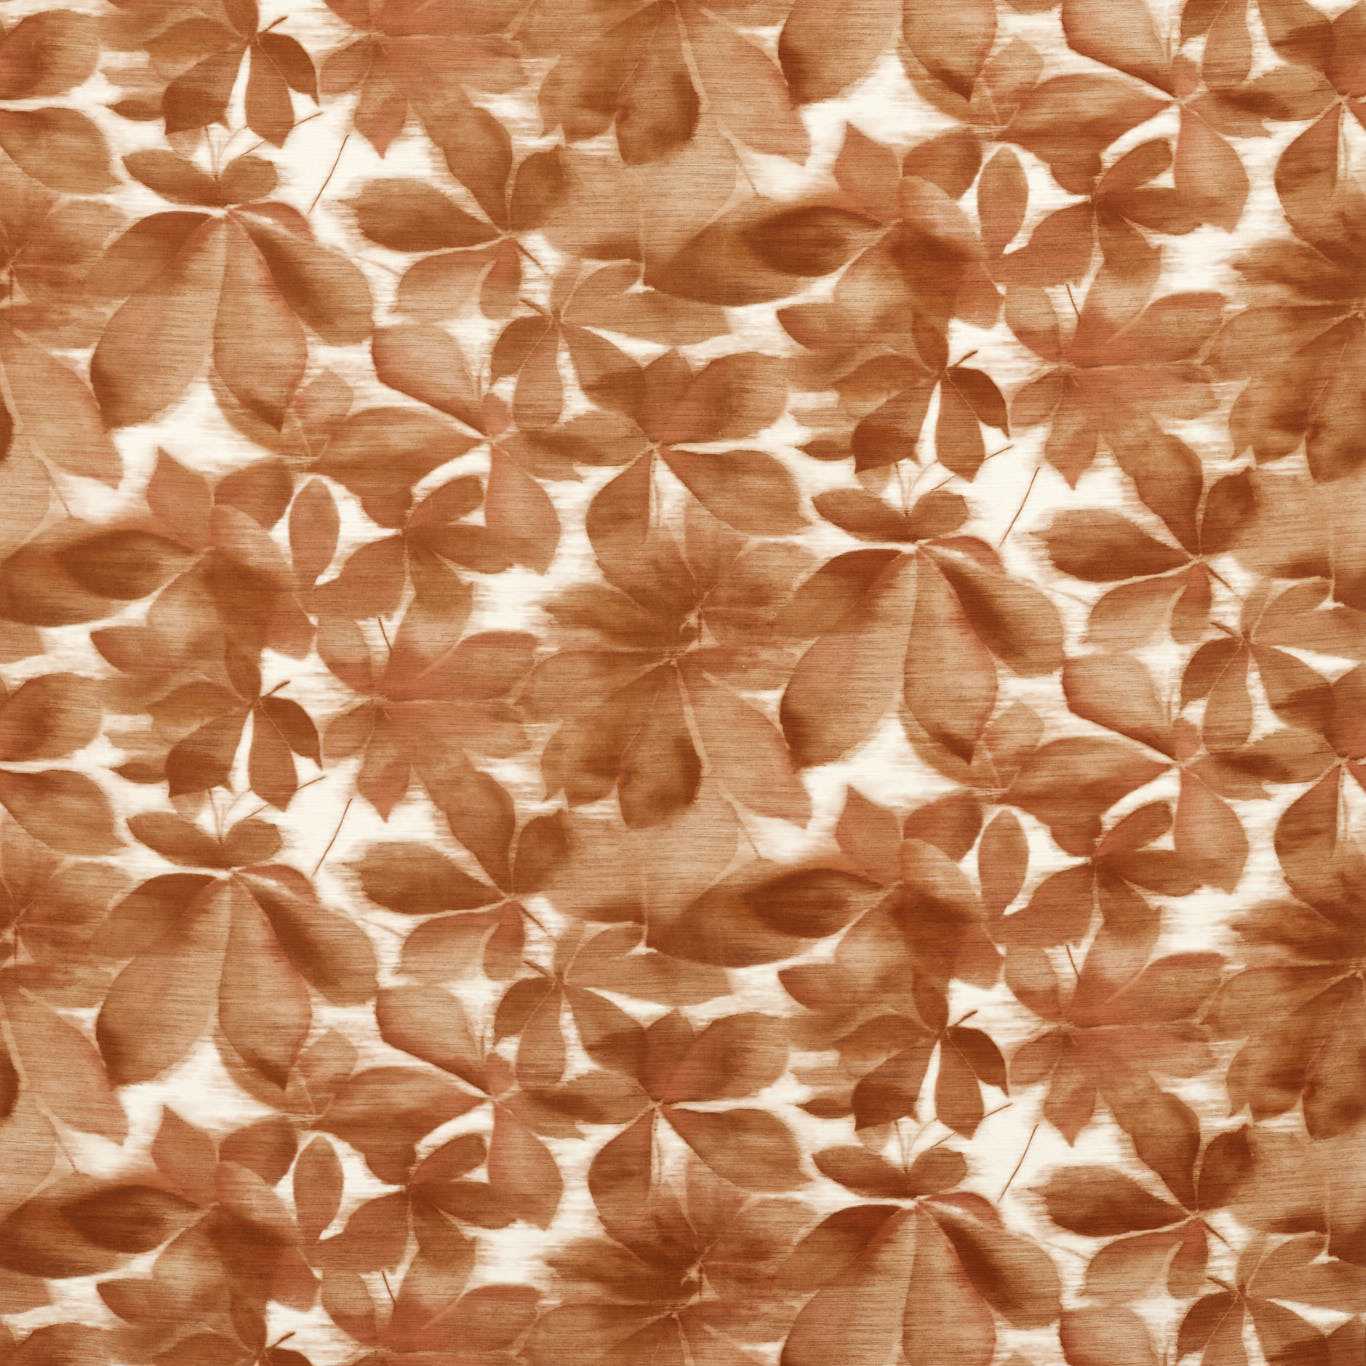 Grounded Baked Terracotta/Parchment Fabric by HAR